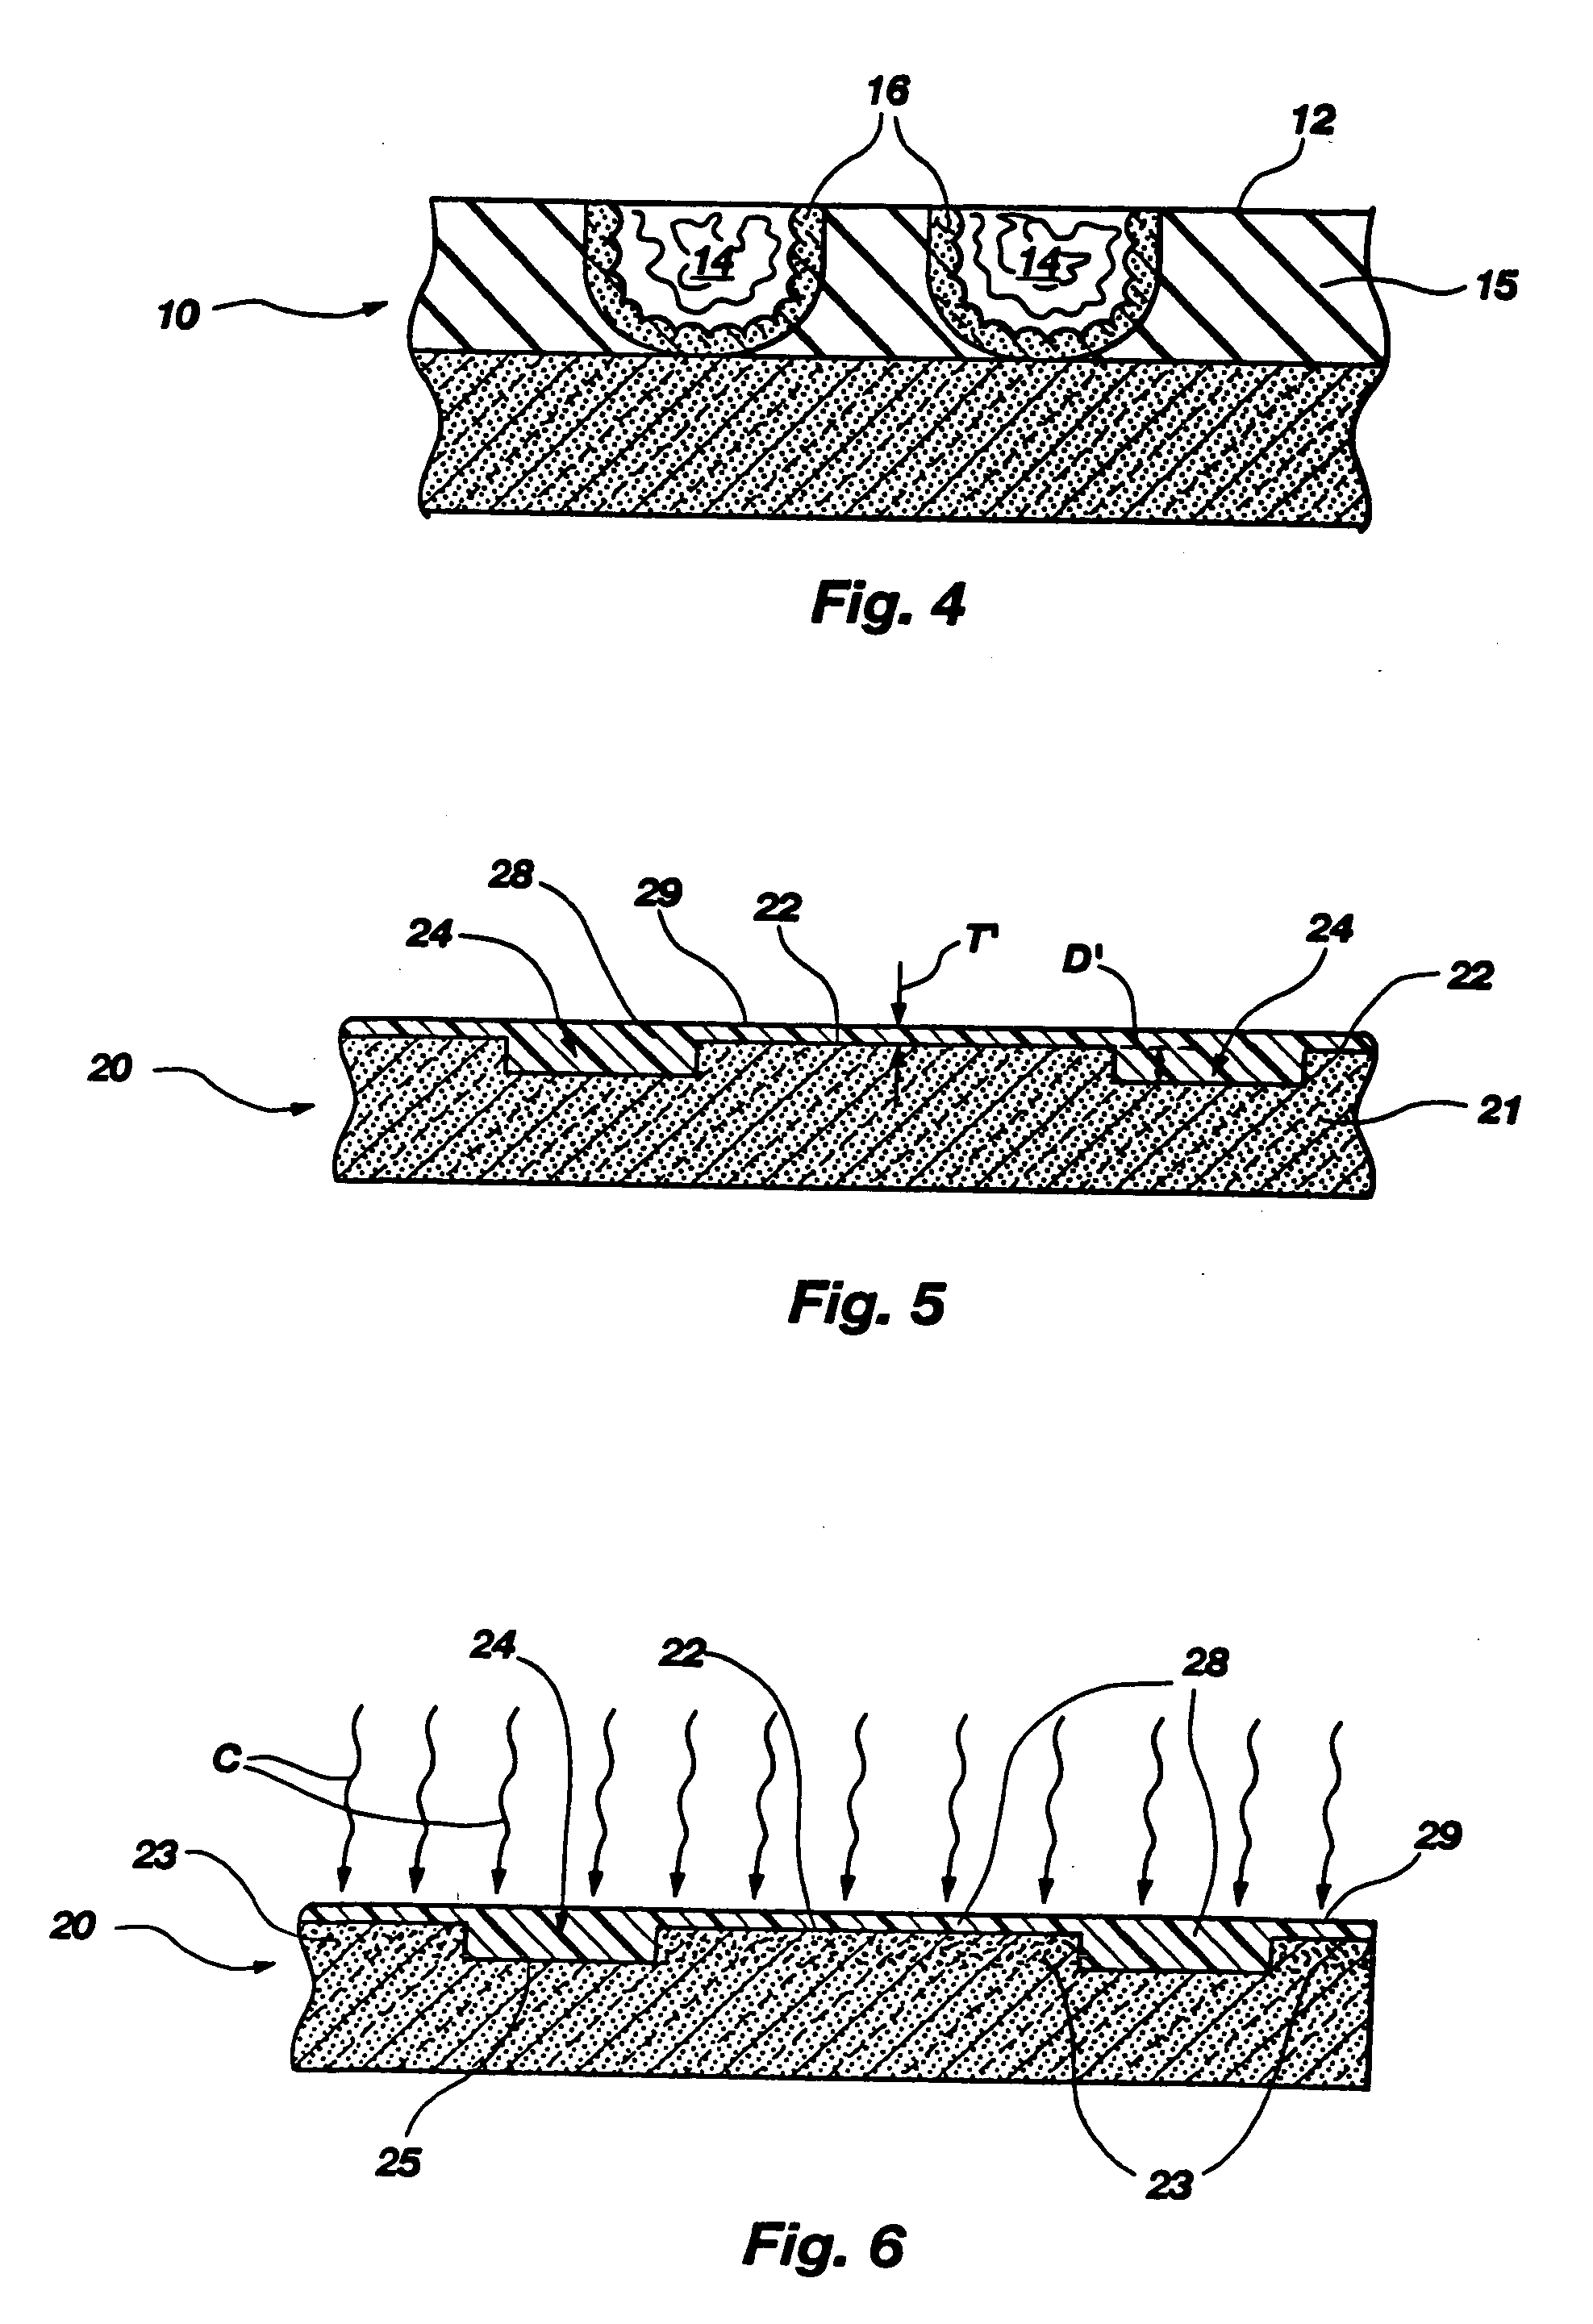 Semiconductor device fabrication methods employing substantially planar buffer material layers to improve the planarity of subsequent planarazation processes